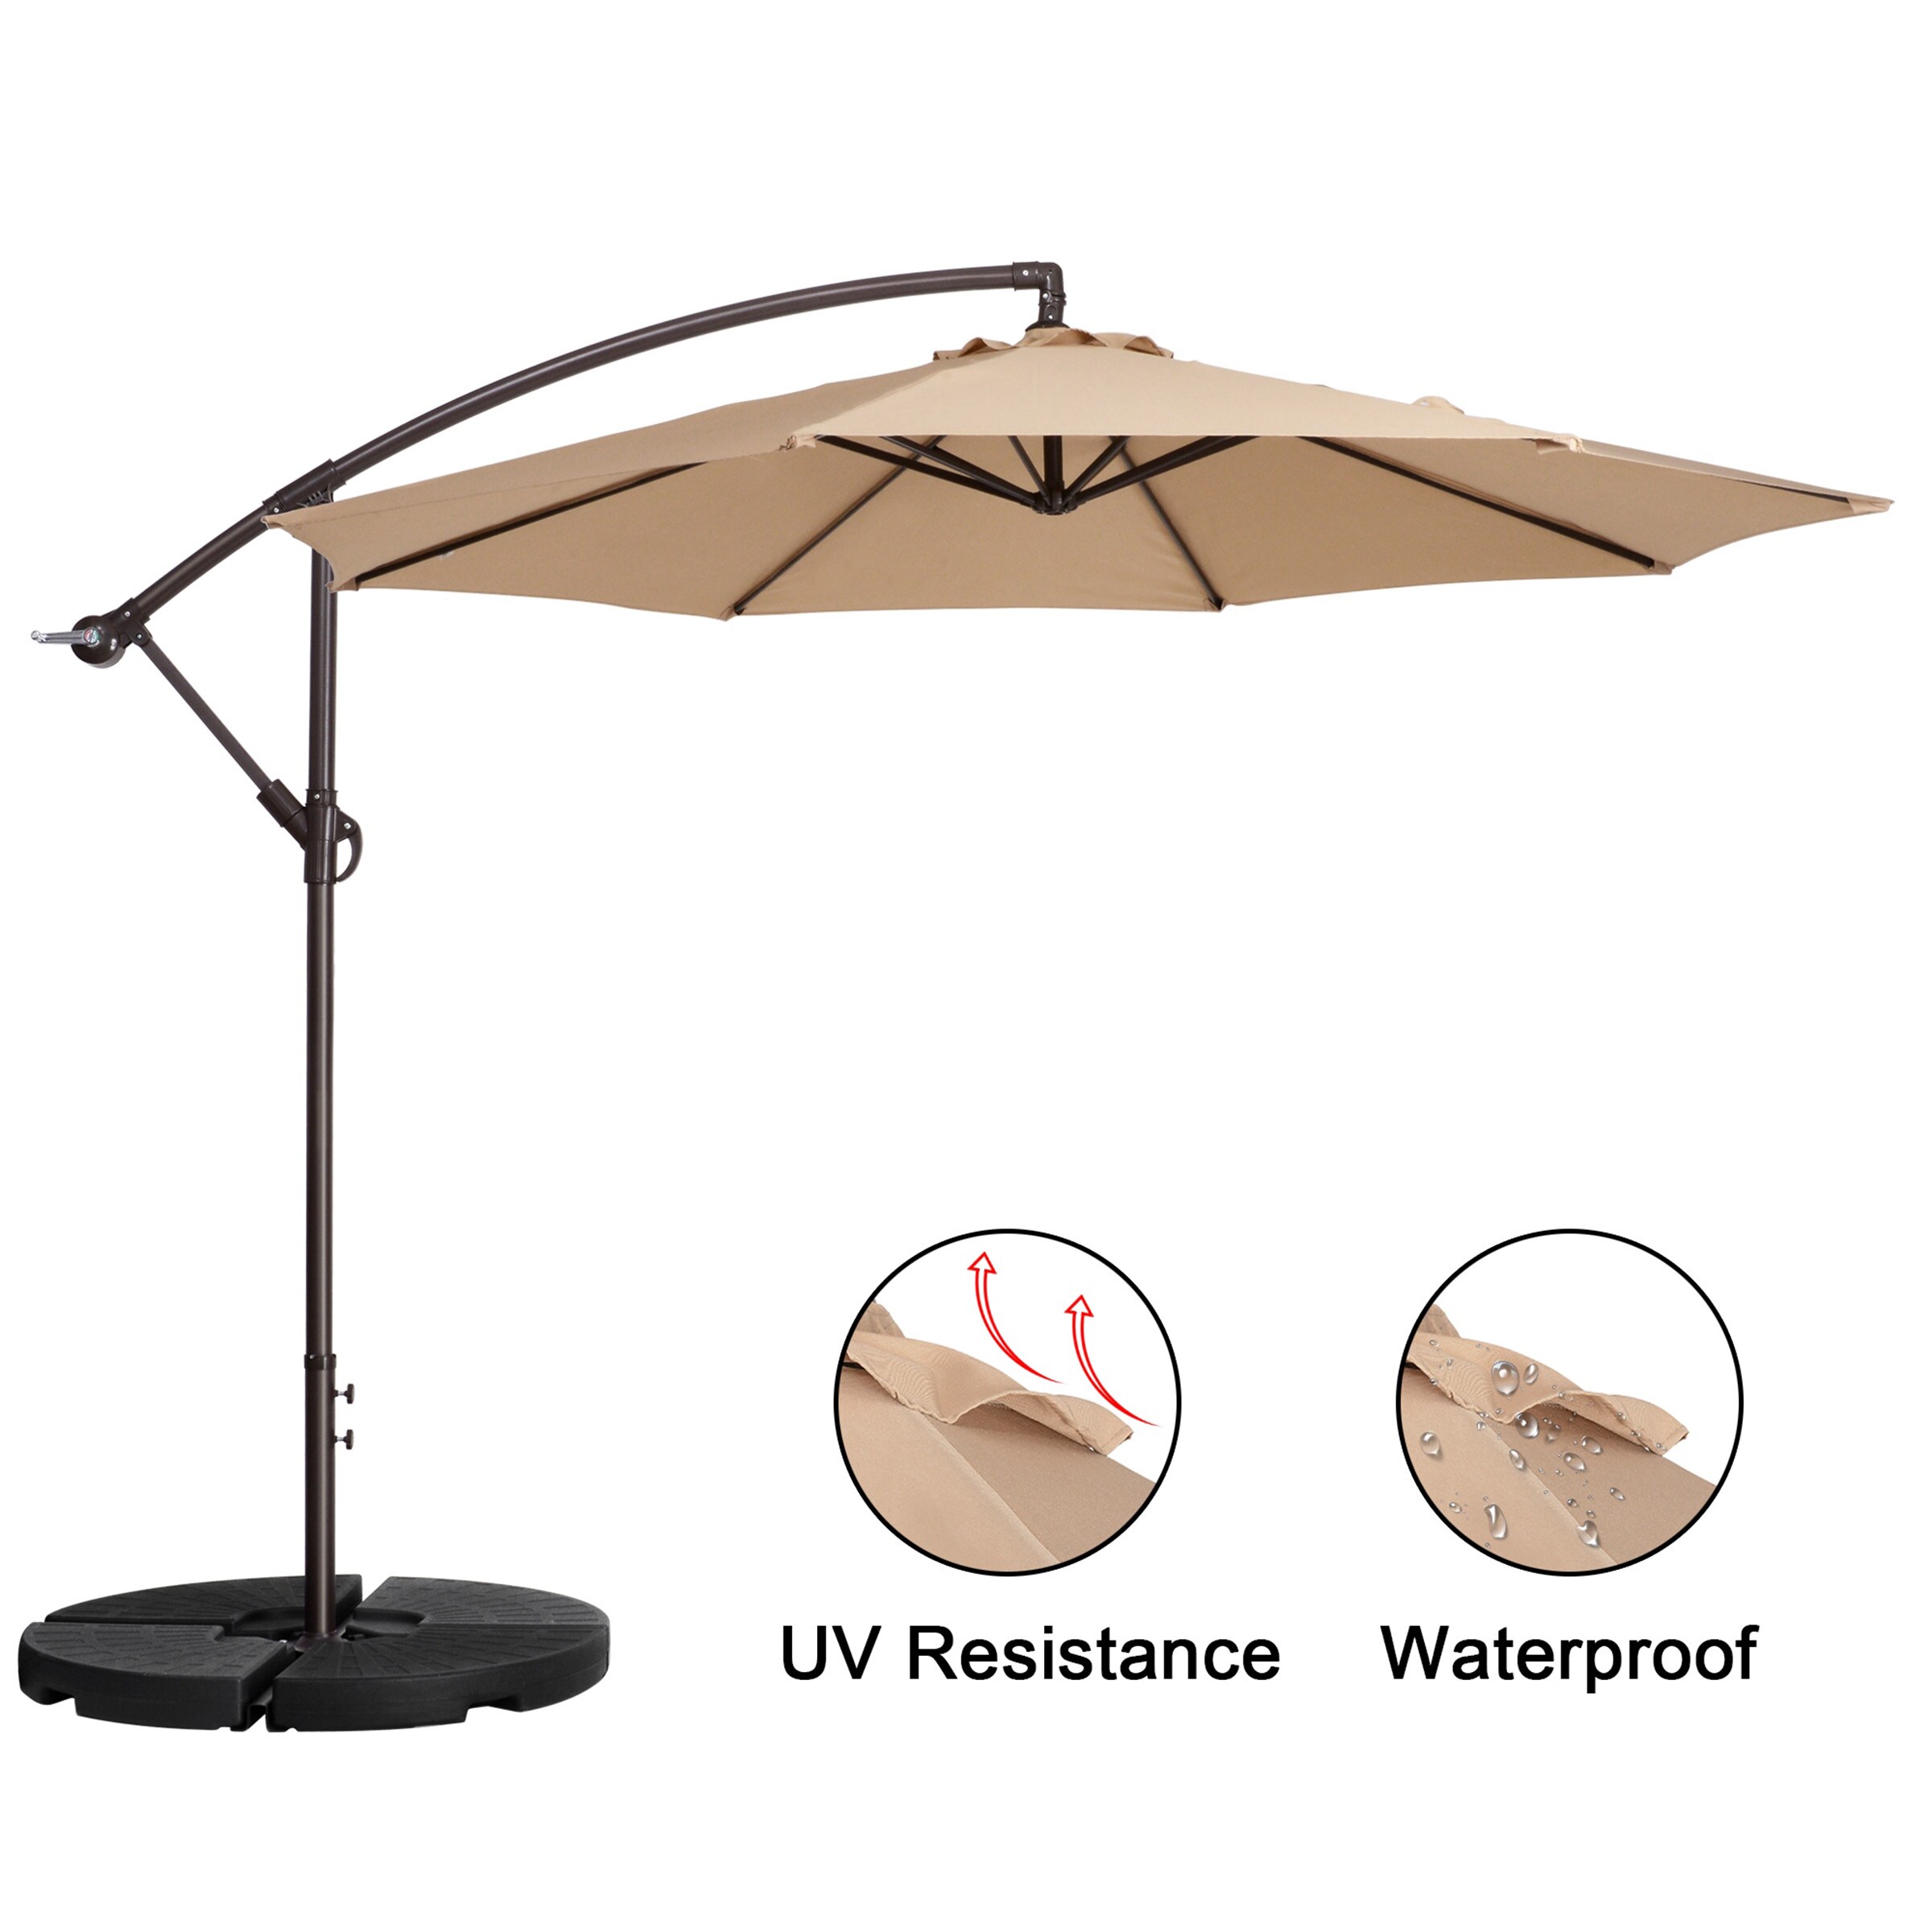 Outdoor Water Resistance Canopy Cover Bag FIT 7 8 9 10 ft Umbrella 